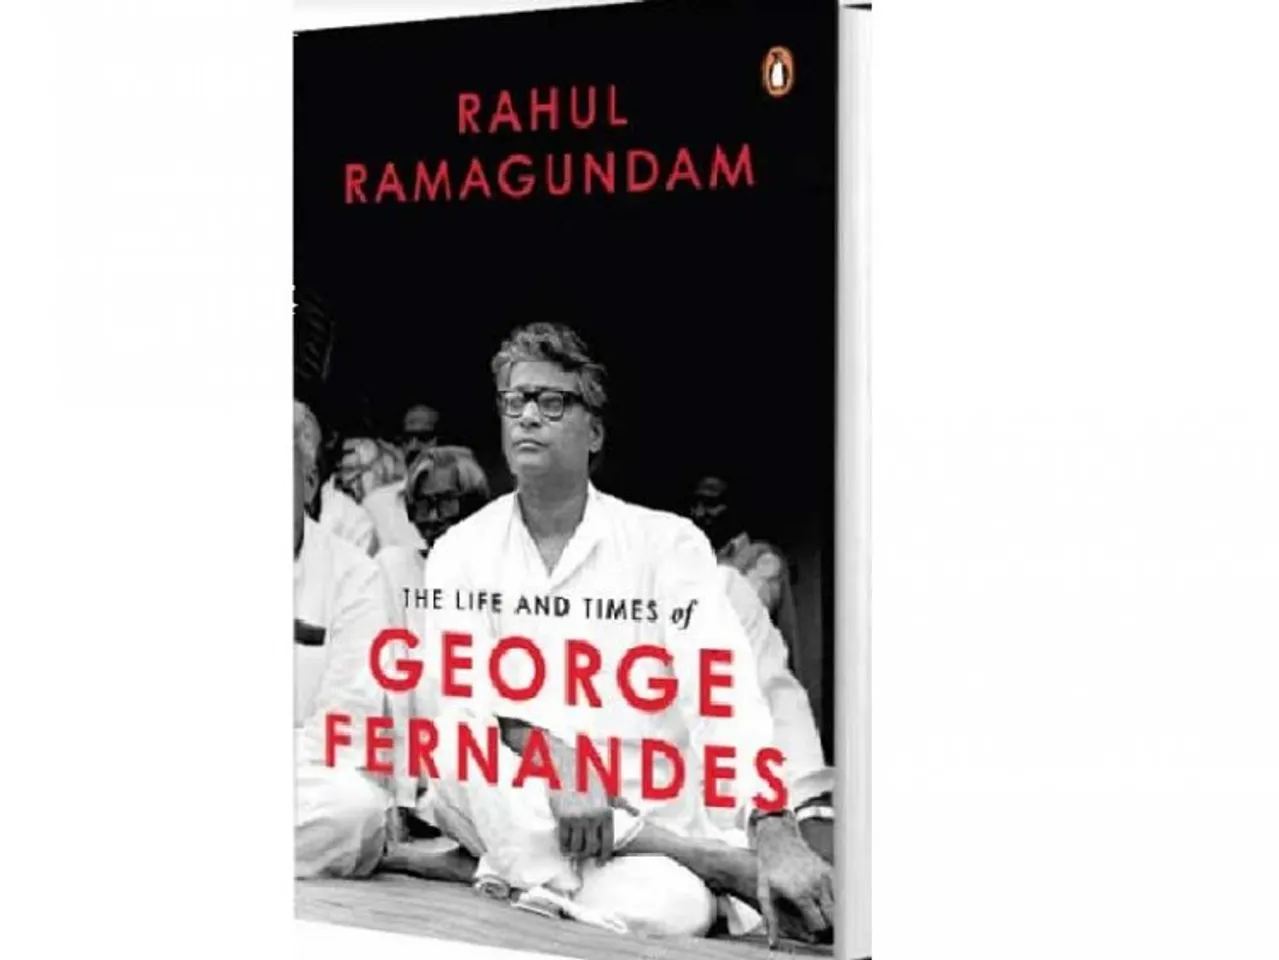 George Fernandes' biography to be released on Aug 26